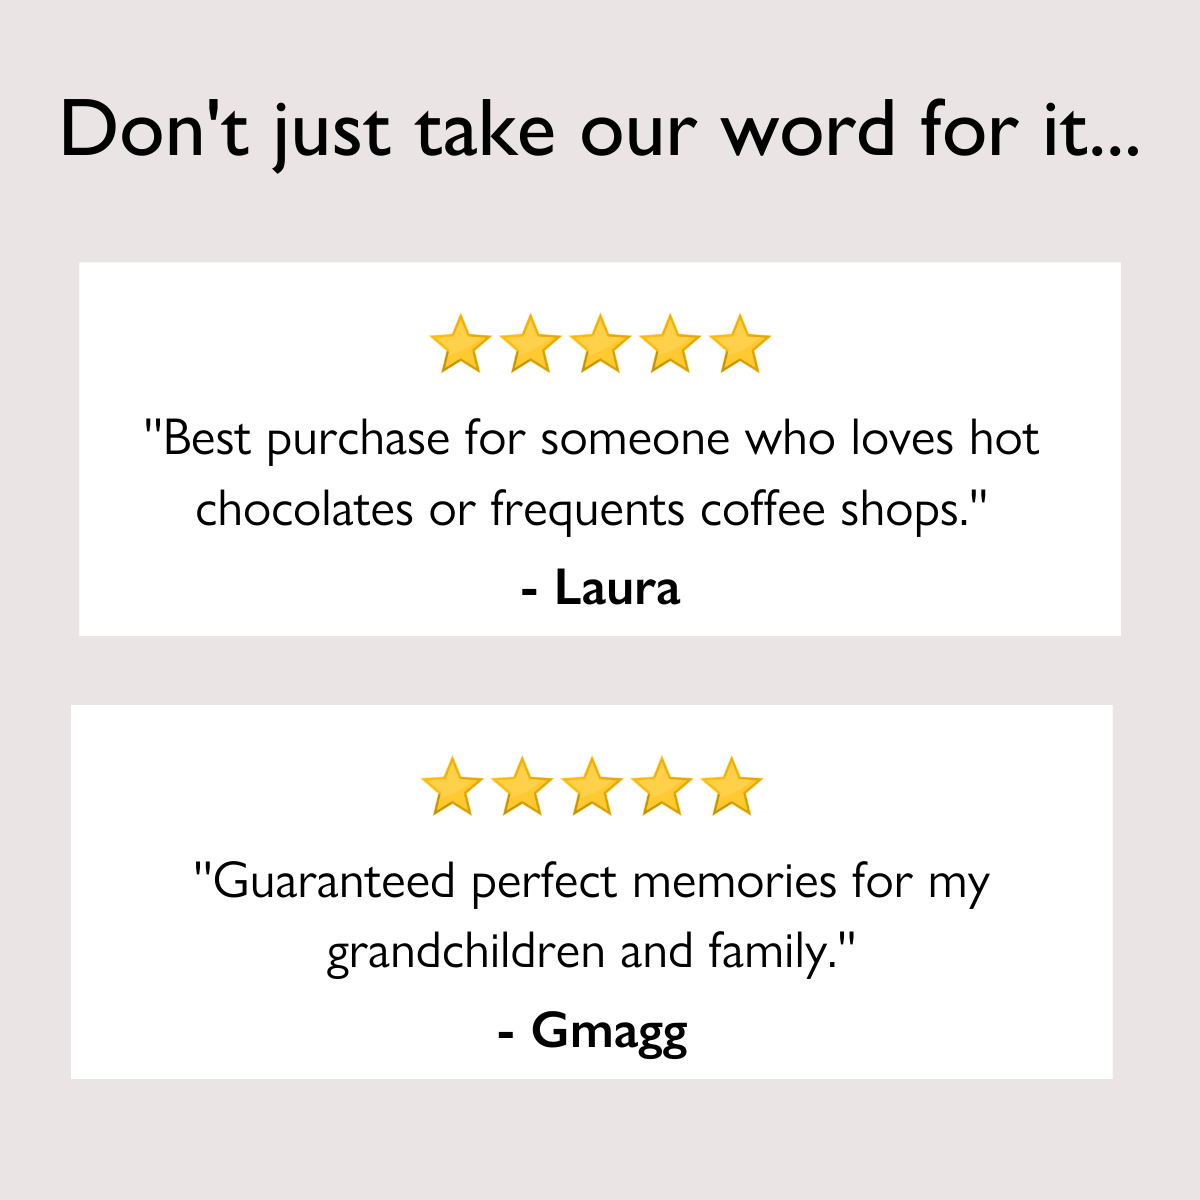 Laura: ''Best purchase for someone who loves hot chocolates or frequents coffee shops.'' Gmagg: ''Guaranteed perfect memories for my grandchildren and family.''